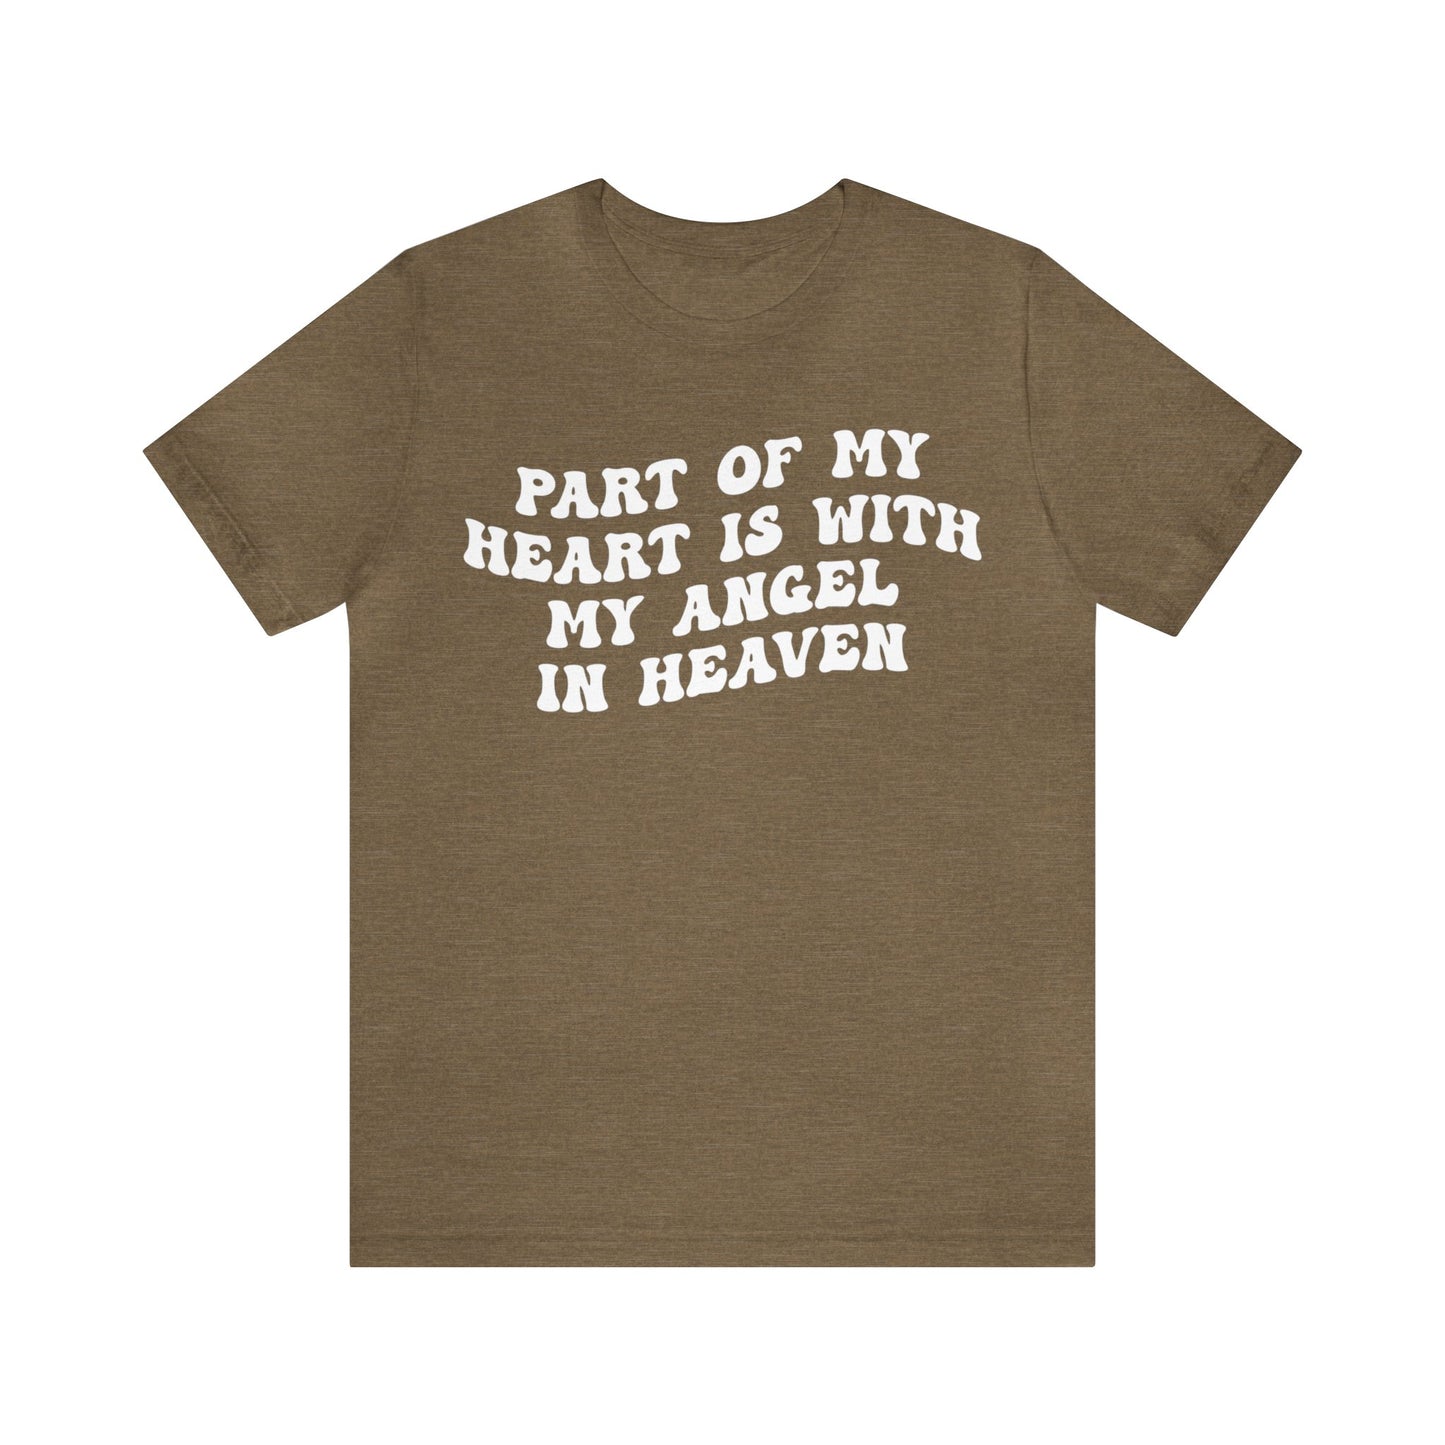 Part Of My Heart Is With My Angel In Heaven Shirt, Inspirational Shirt, Mom Shirt, Happy Life, Positive Shirt, Motivational Shirt, T1299